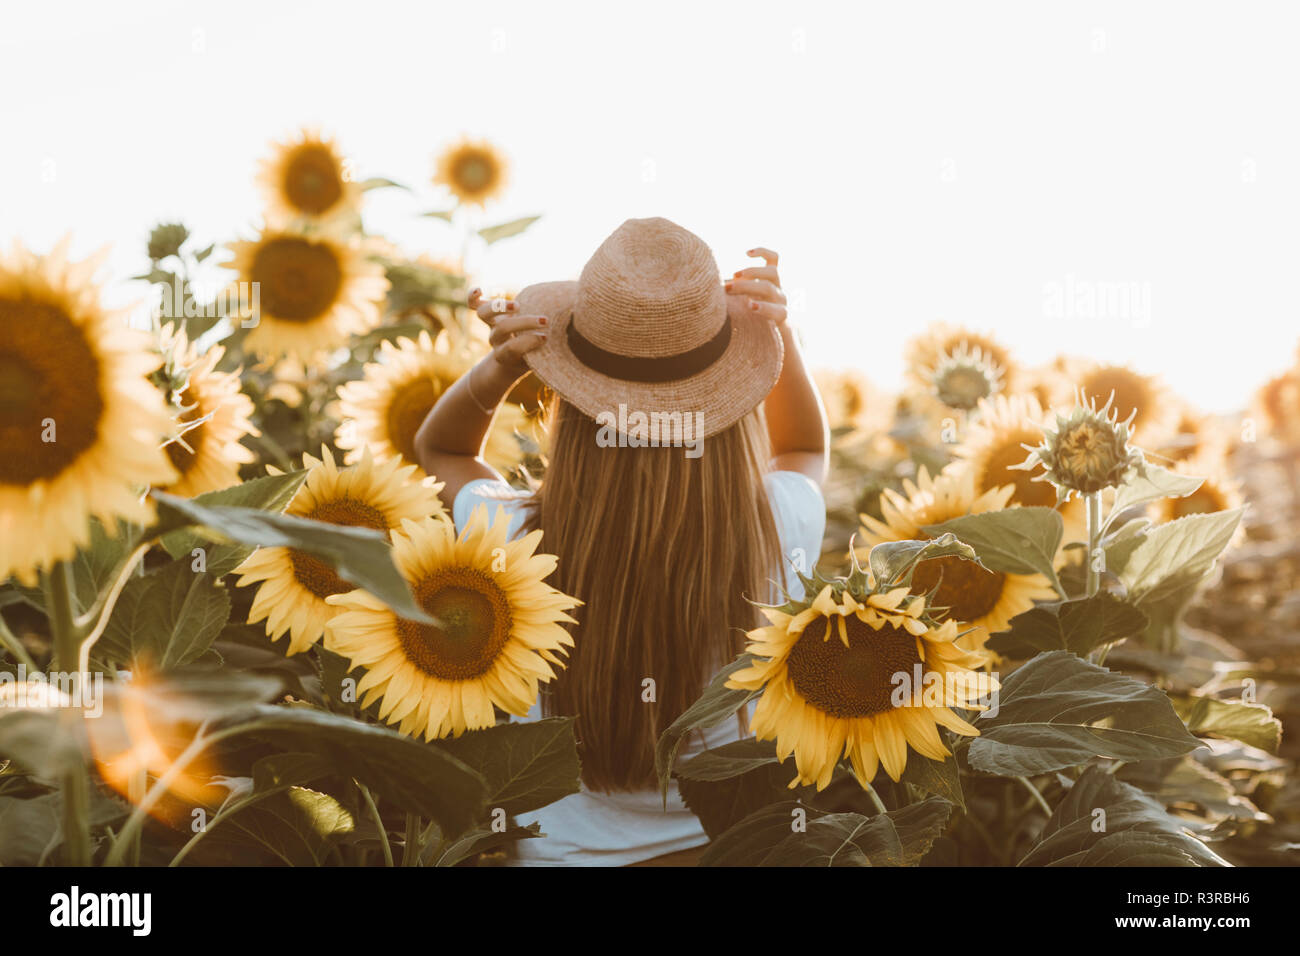 Back view of young woman standing in a field of sunflowers Stock Photo